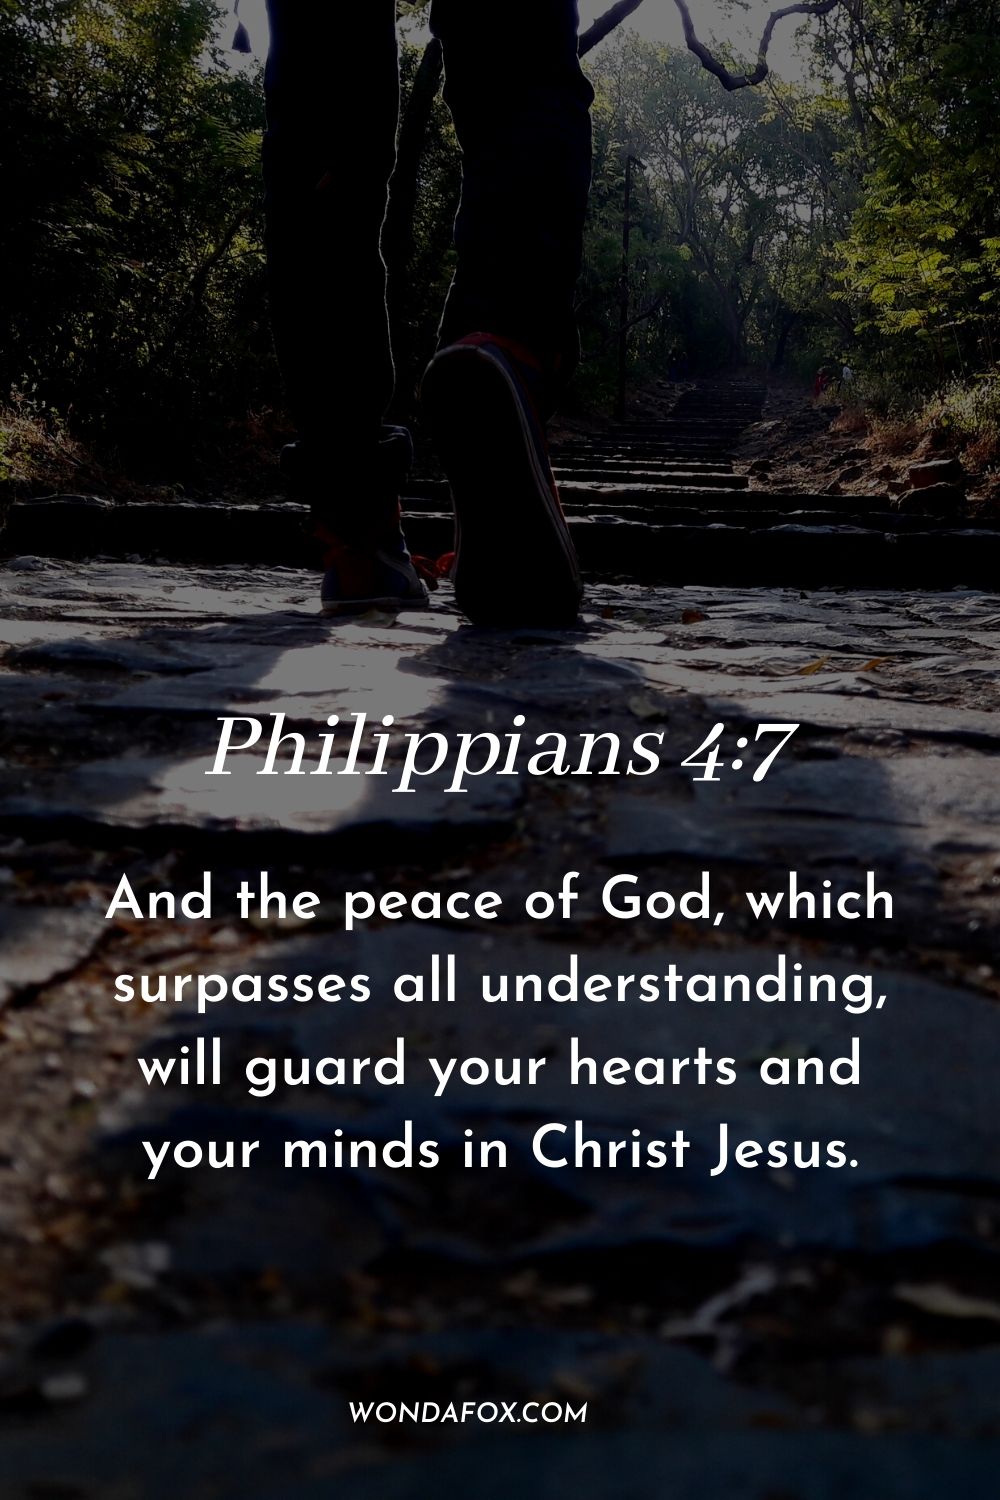 And the peace of God, which surpasses all understanding, will guard your hearts and your minds in Christ Jesus. Philippians 4:7